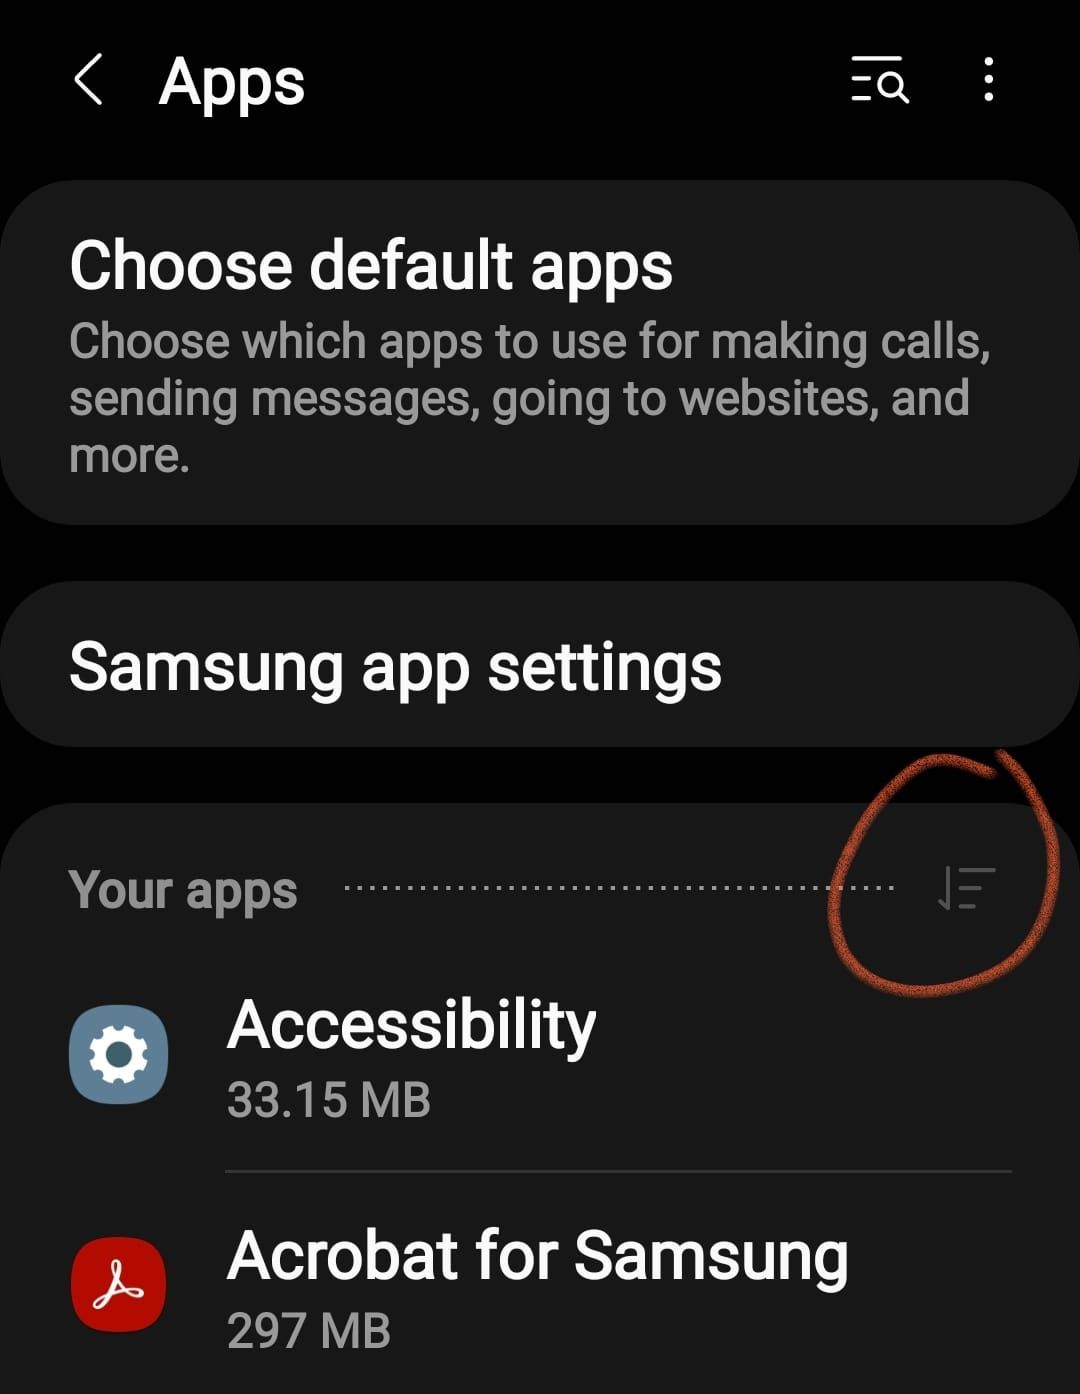 Clear View Cover stops working after some time - Samsung Community